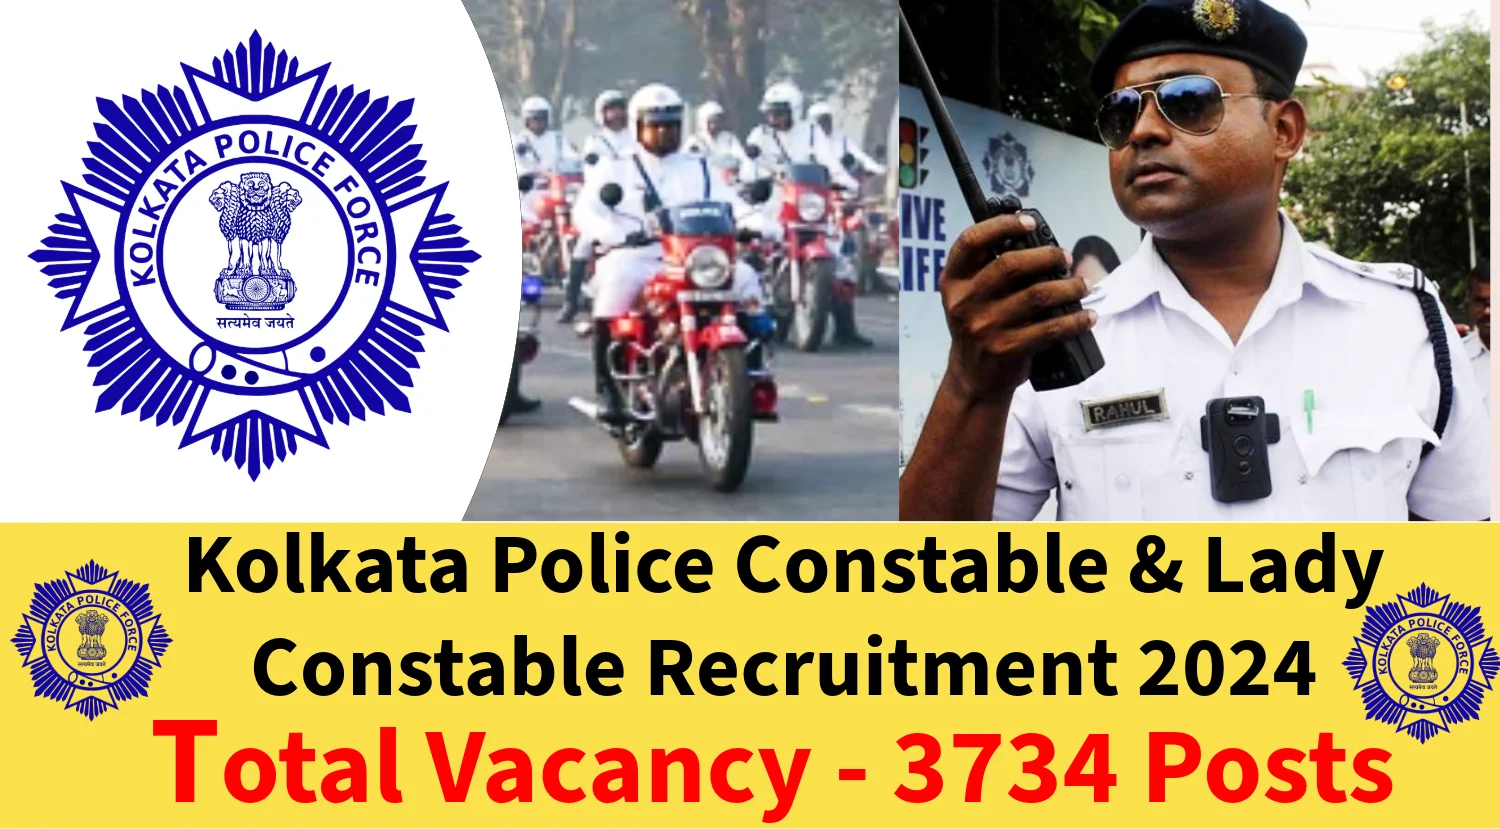 Kolkata Police Constable & Lady Constable Recruitment 2024 Notification Out for 3734 Posts